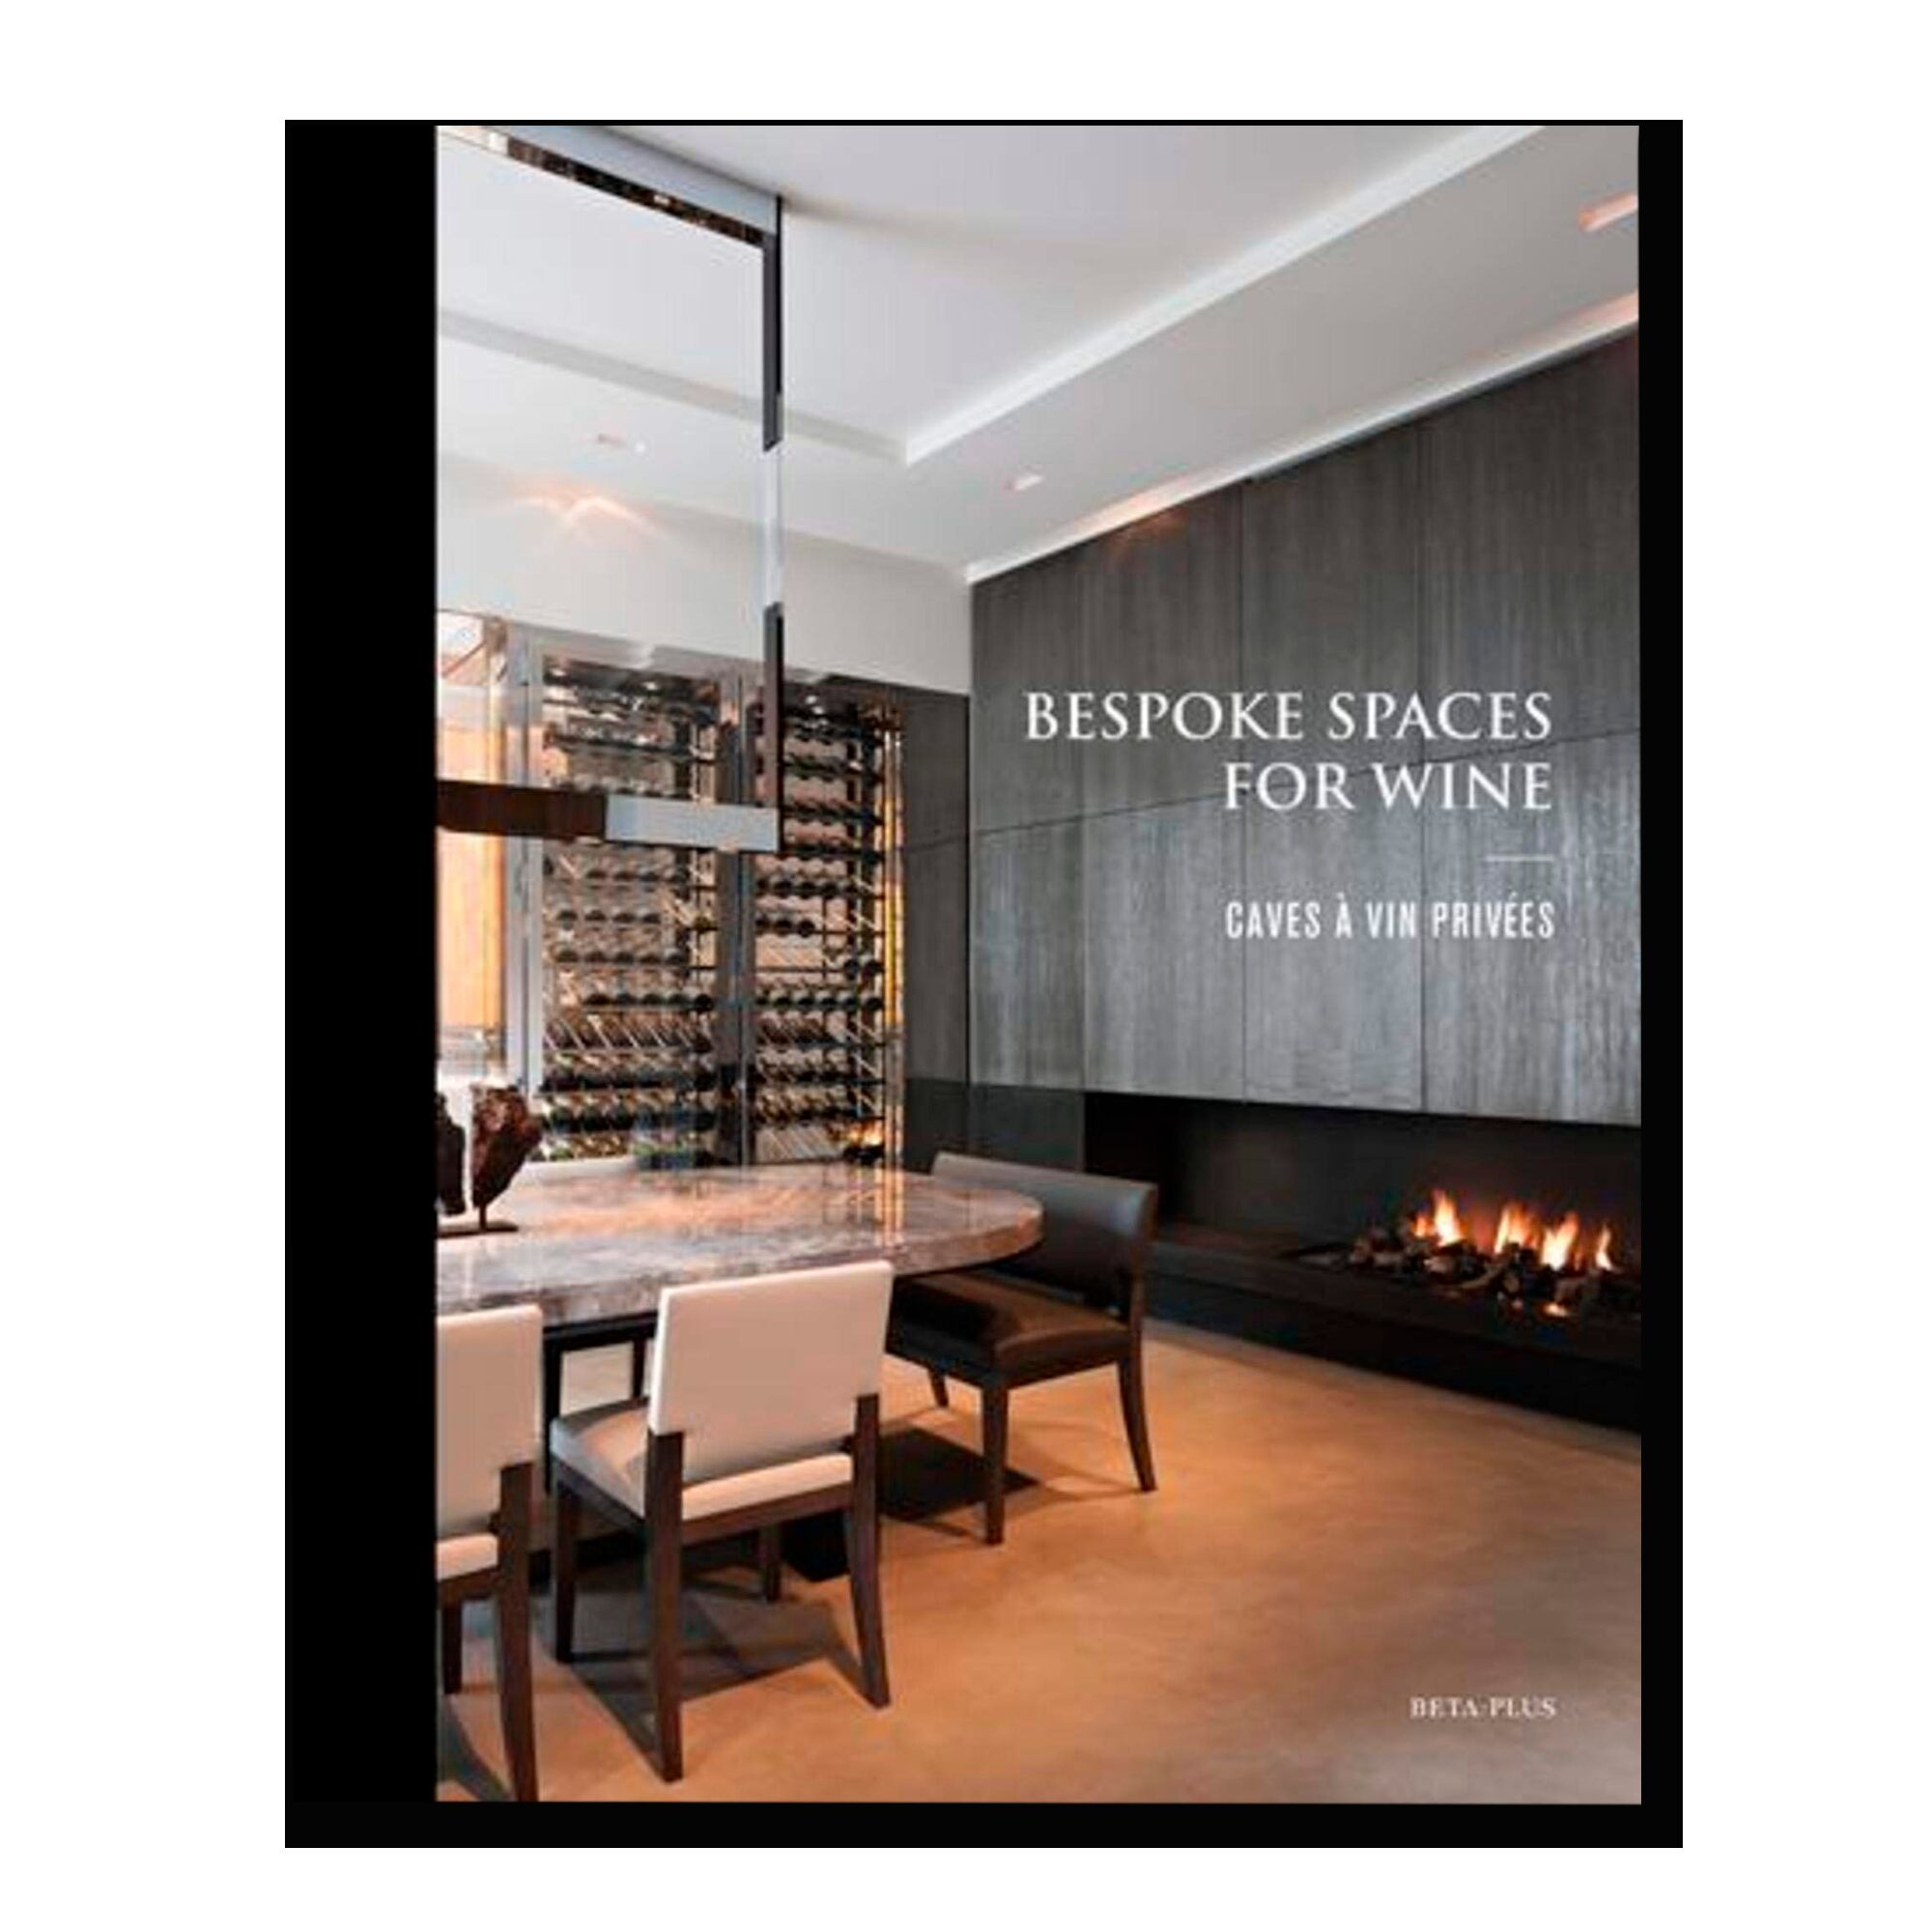 Bespoke Spaces for Wine (Dutch, English and French Edition) 